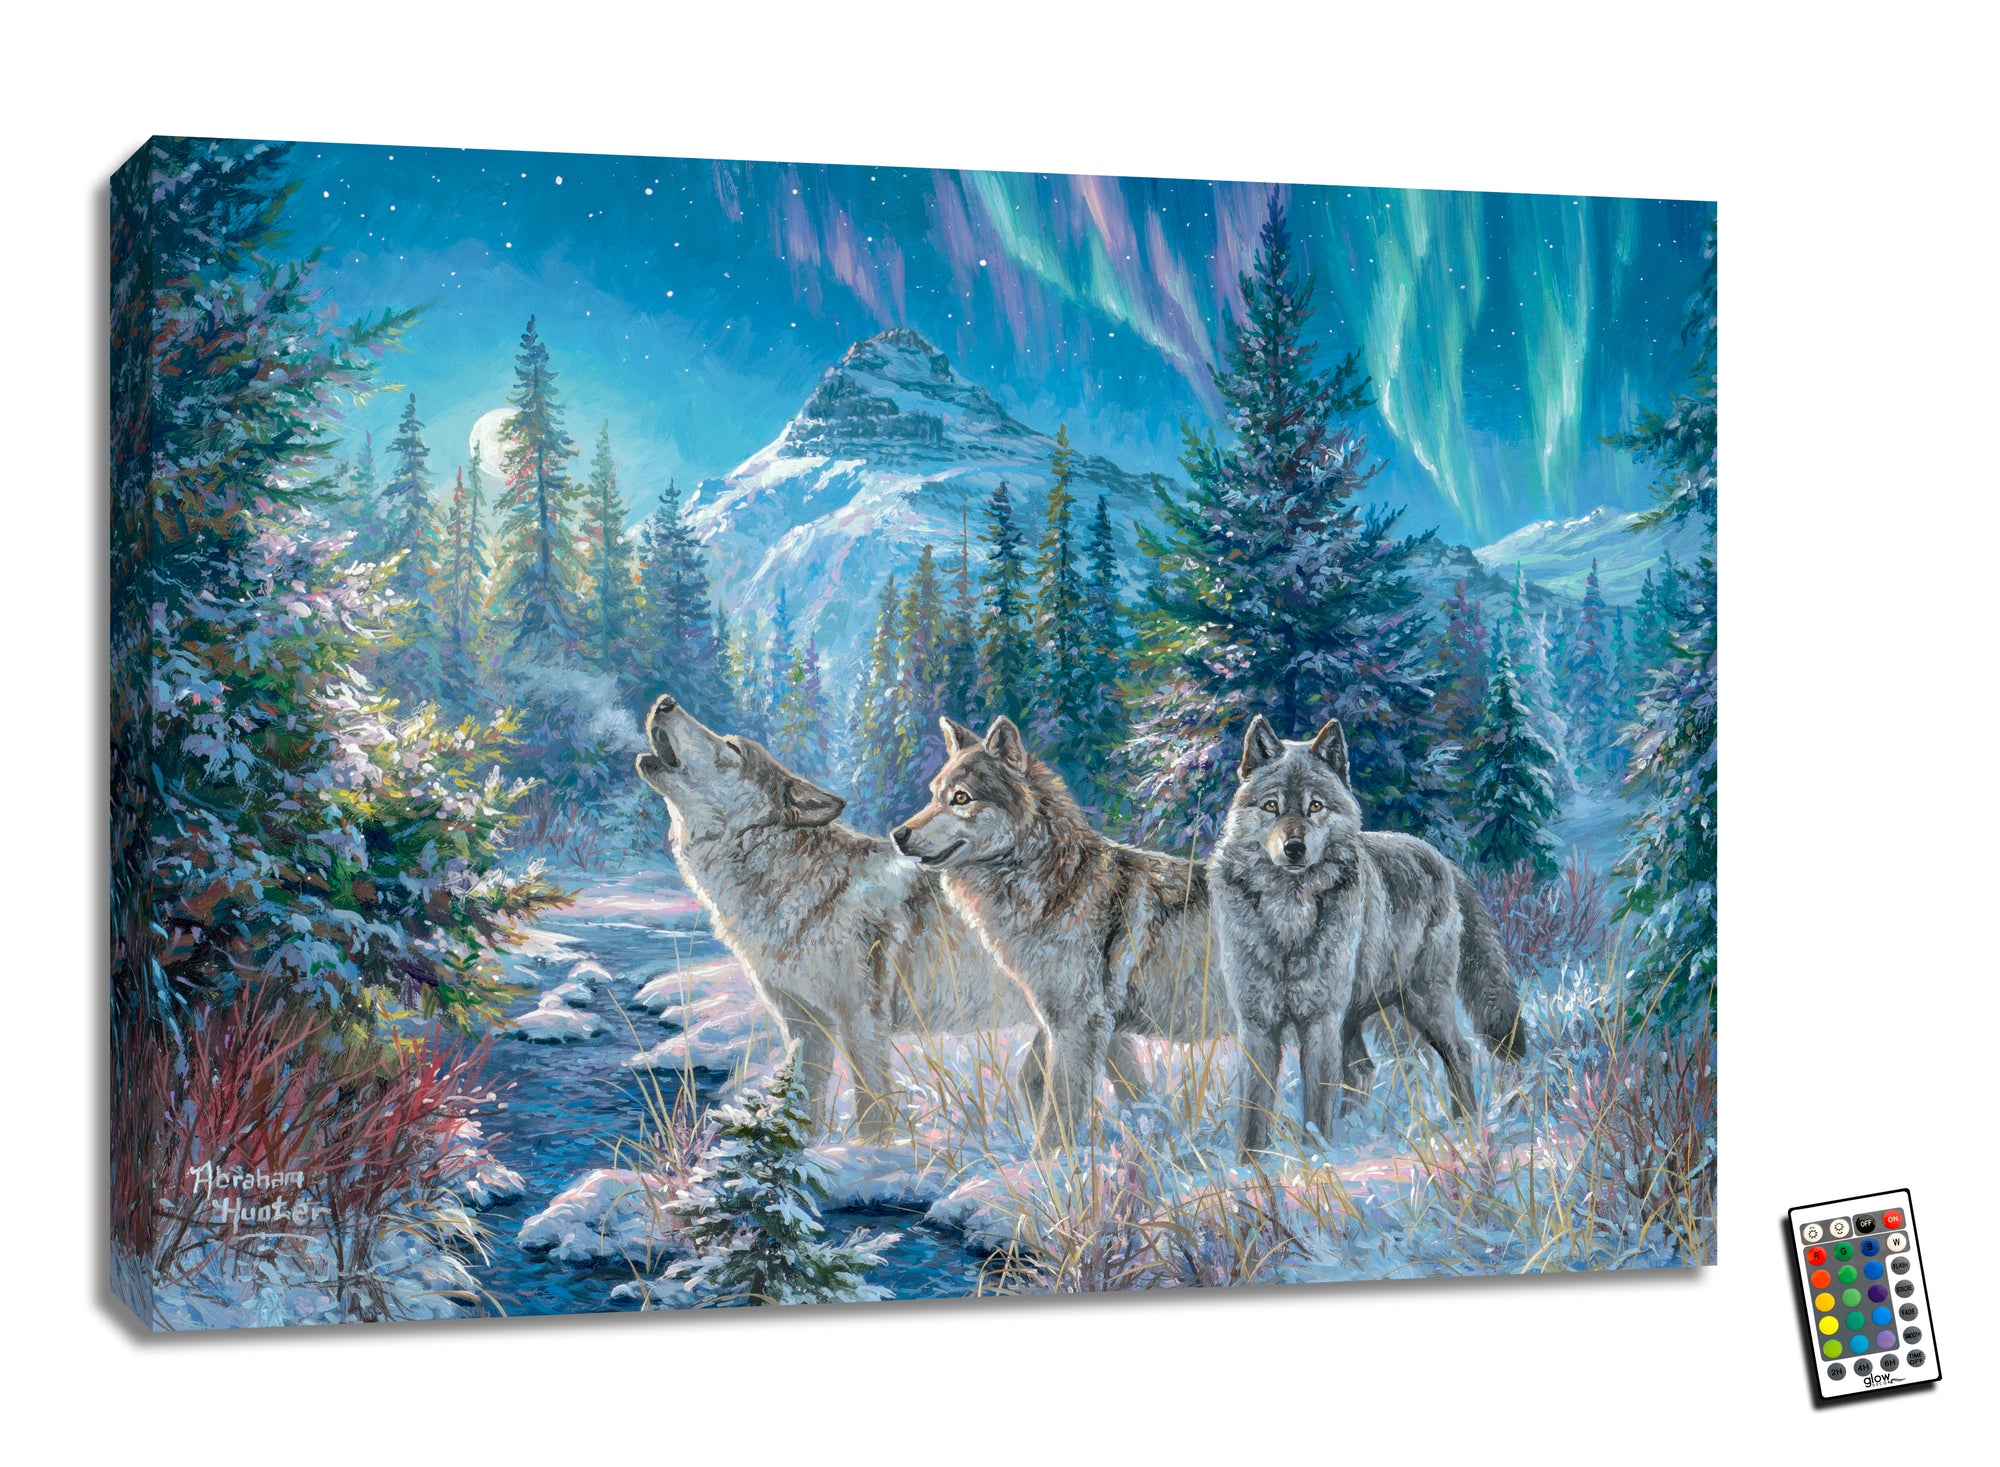 Featuring three majestic wolves standing amidst a serene snowy landscape. Behind them, towering pines stretch towards the sky, while a snow-covered peak rises majestically in the distance. The moon's gentle glow shines through the branches of a tree